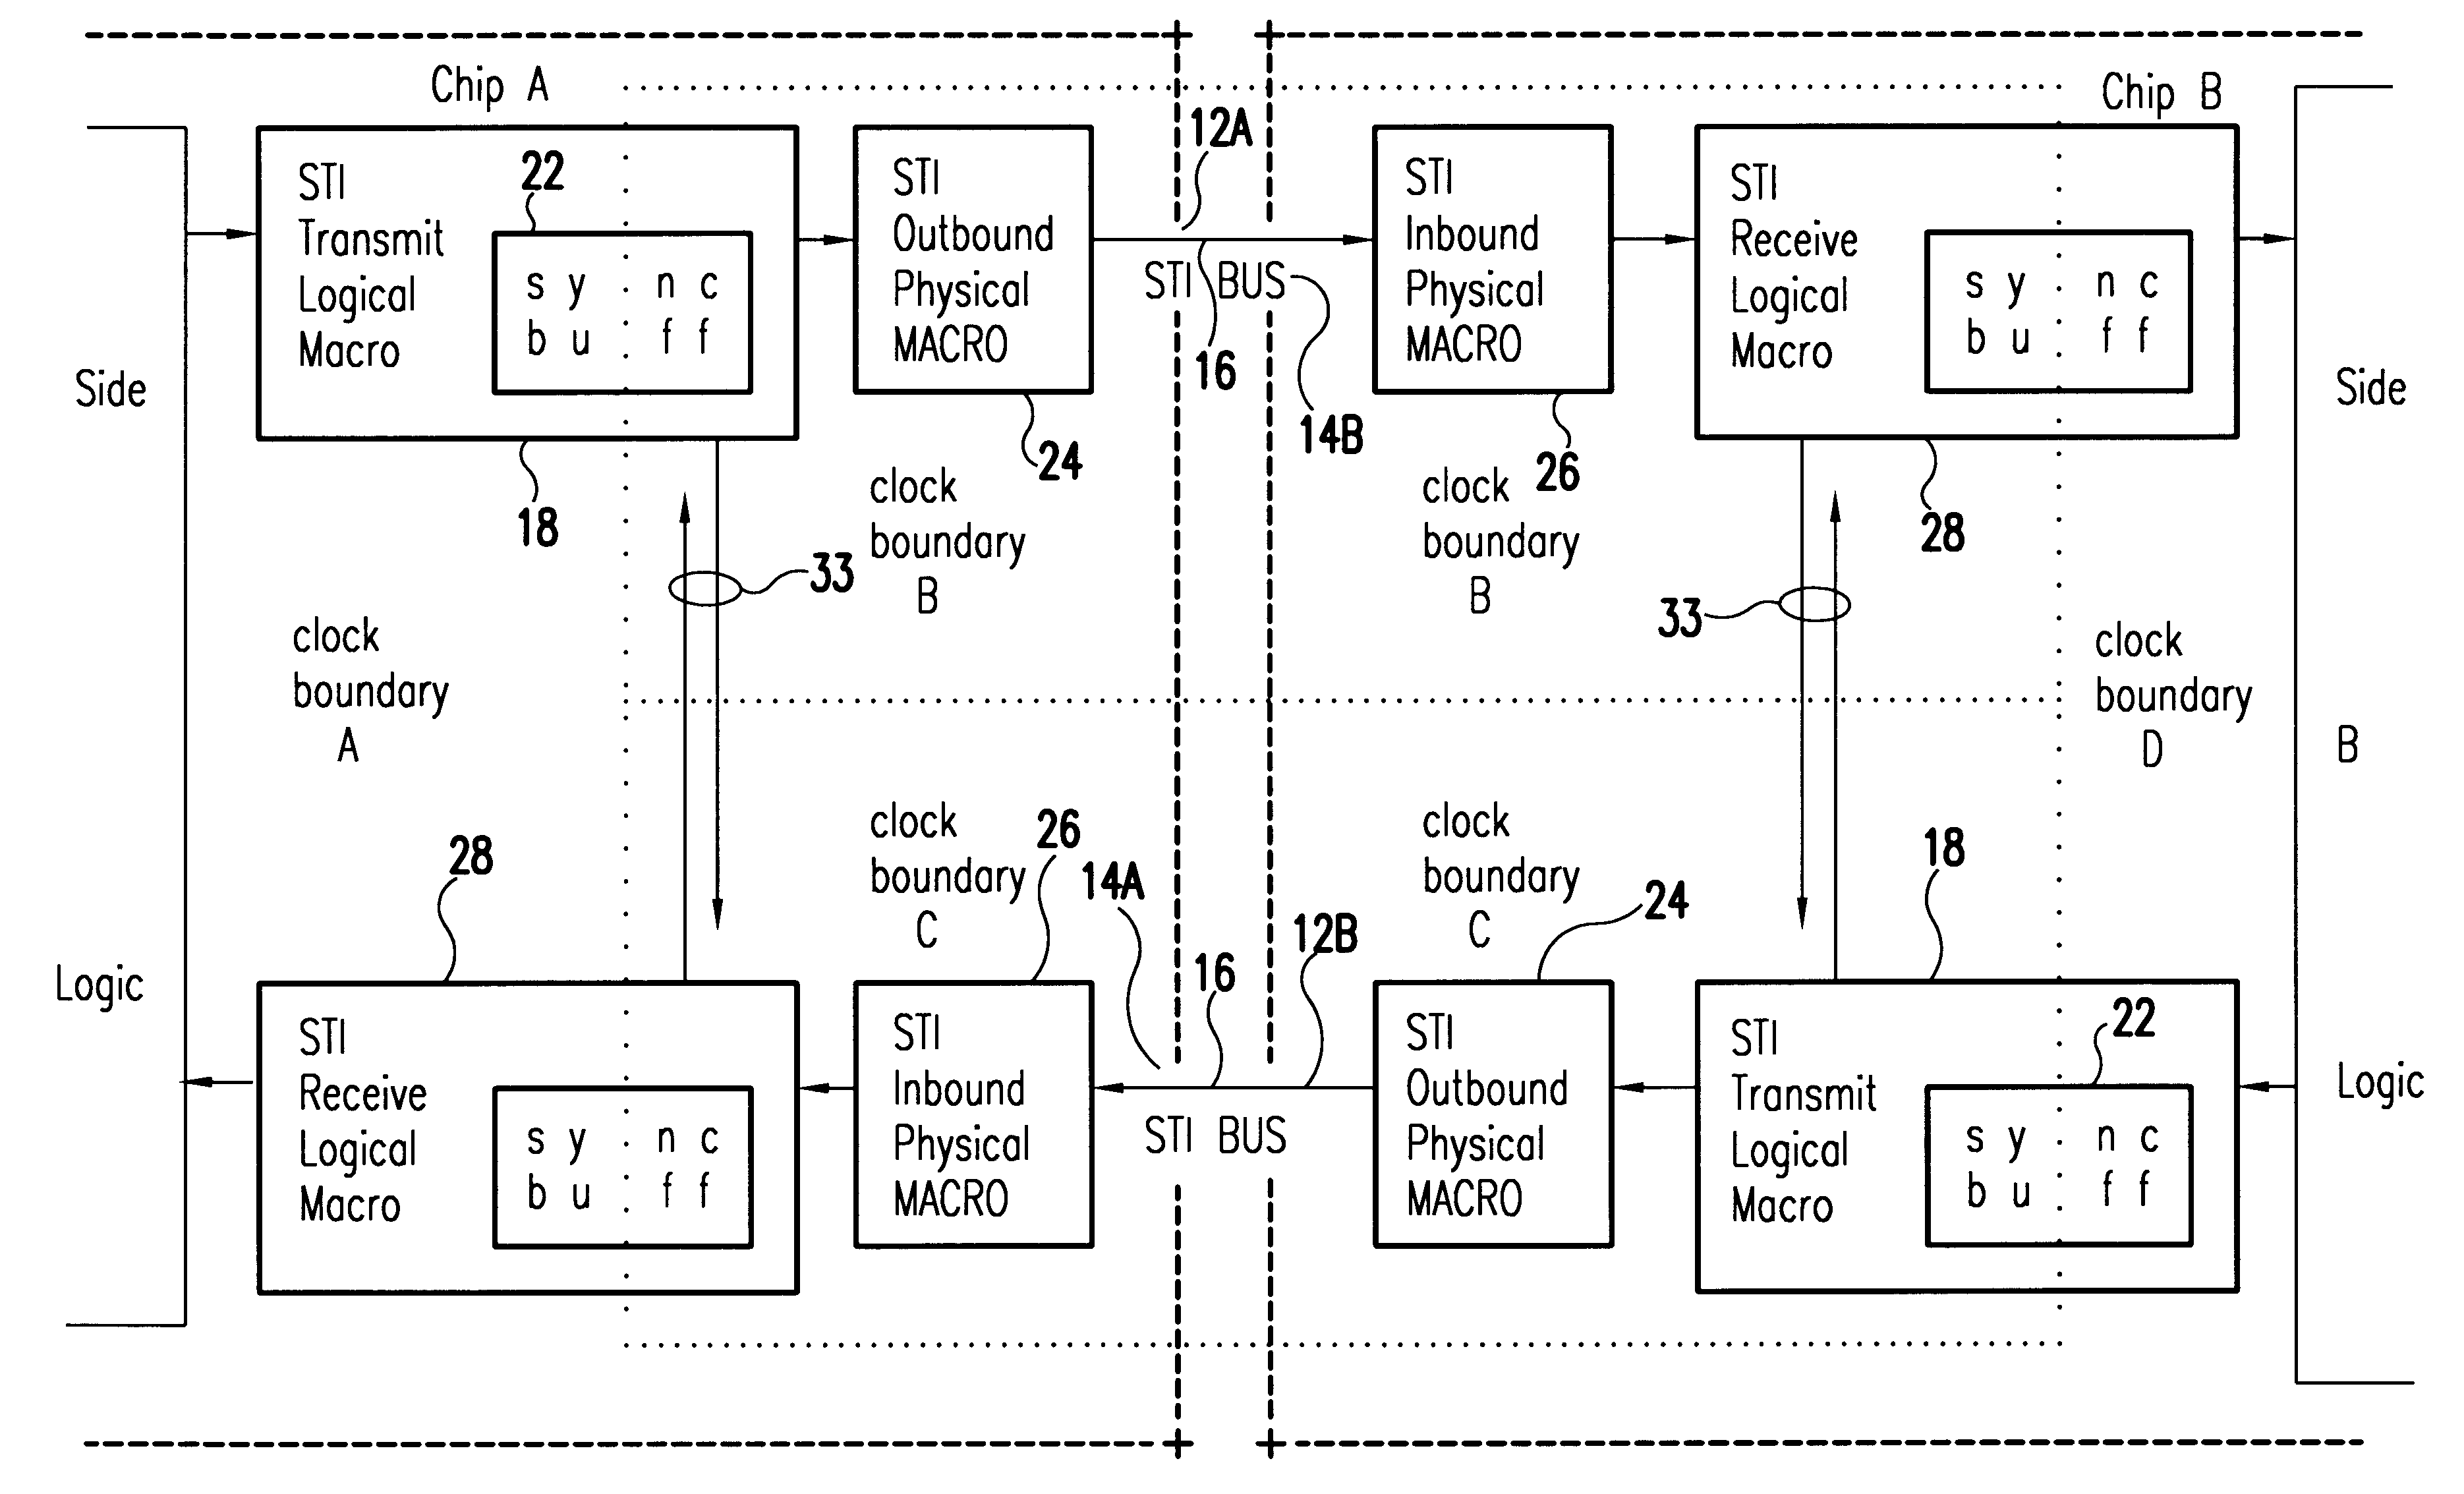 Synchronous interface for transmitting data in a system of massively parallel processors